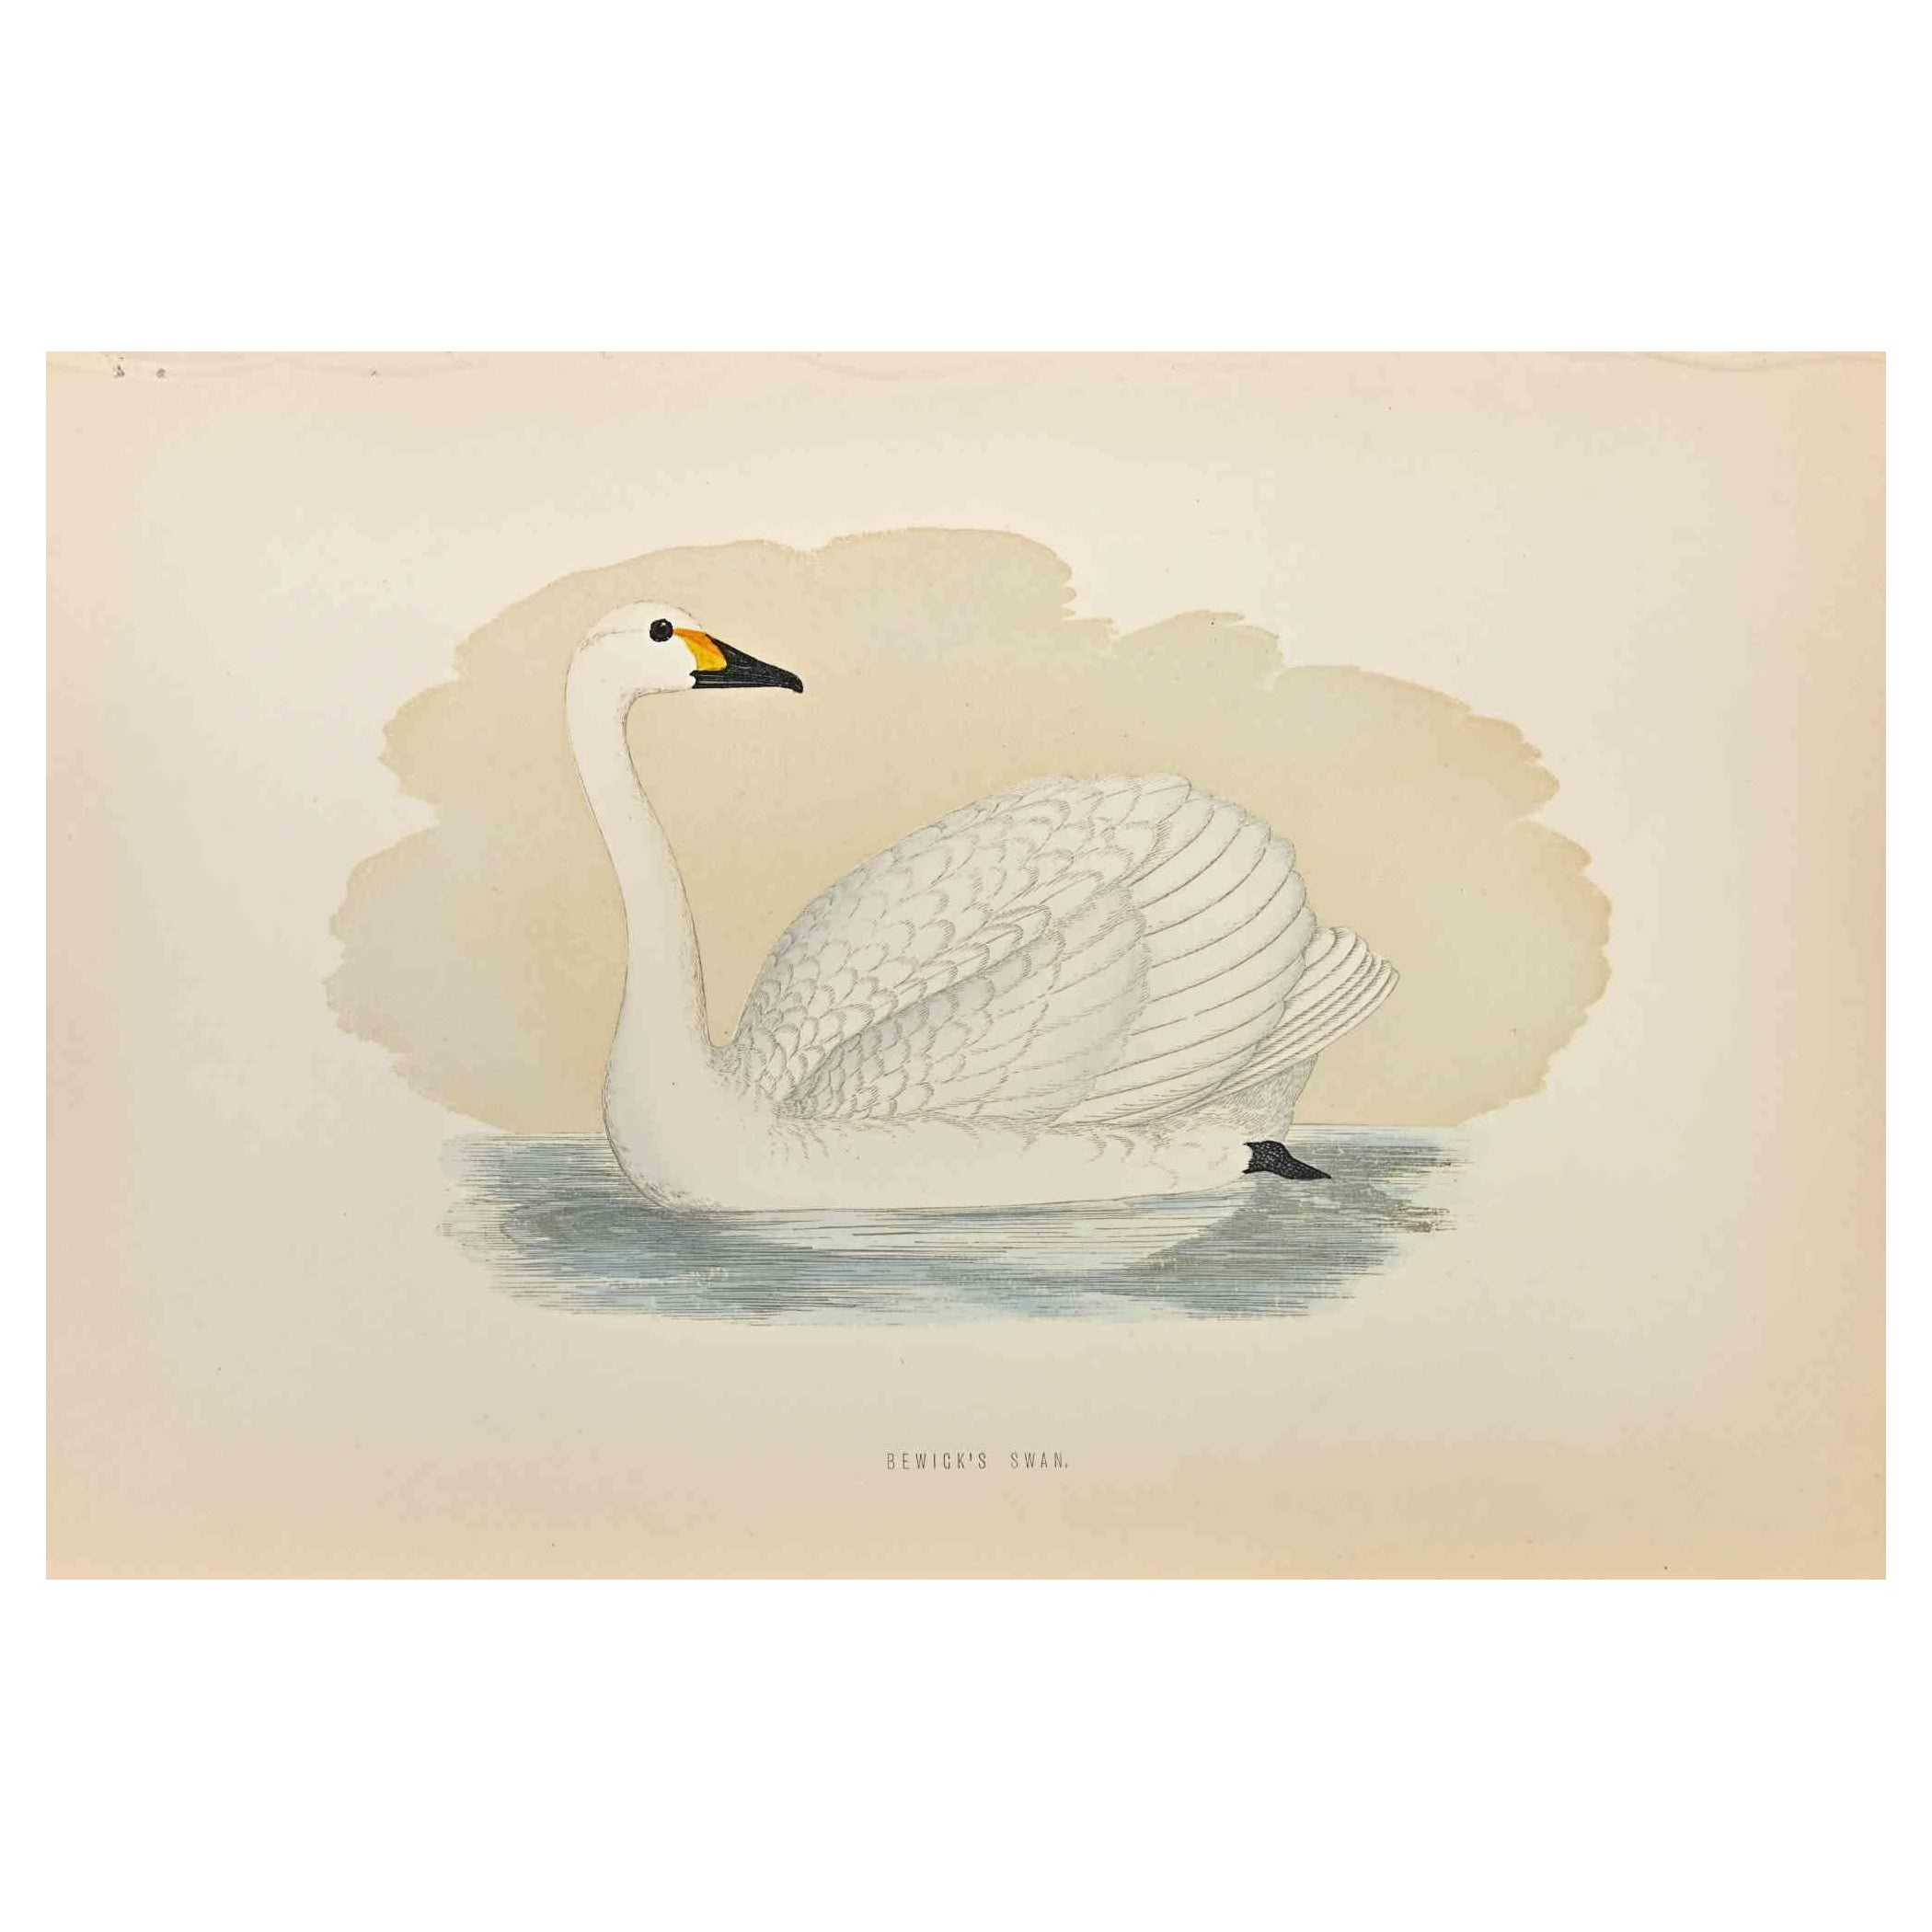  Bewick's Swan is a modern artwork realized in 1870 by the British artist Alexander Francis Lydon (1836-1917) . 

Woodcut print, hand colored, published by London, Bell & Sons, 1870.  Name of the bird printed in plate. This work is part of a print